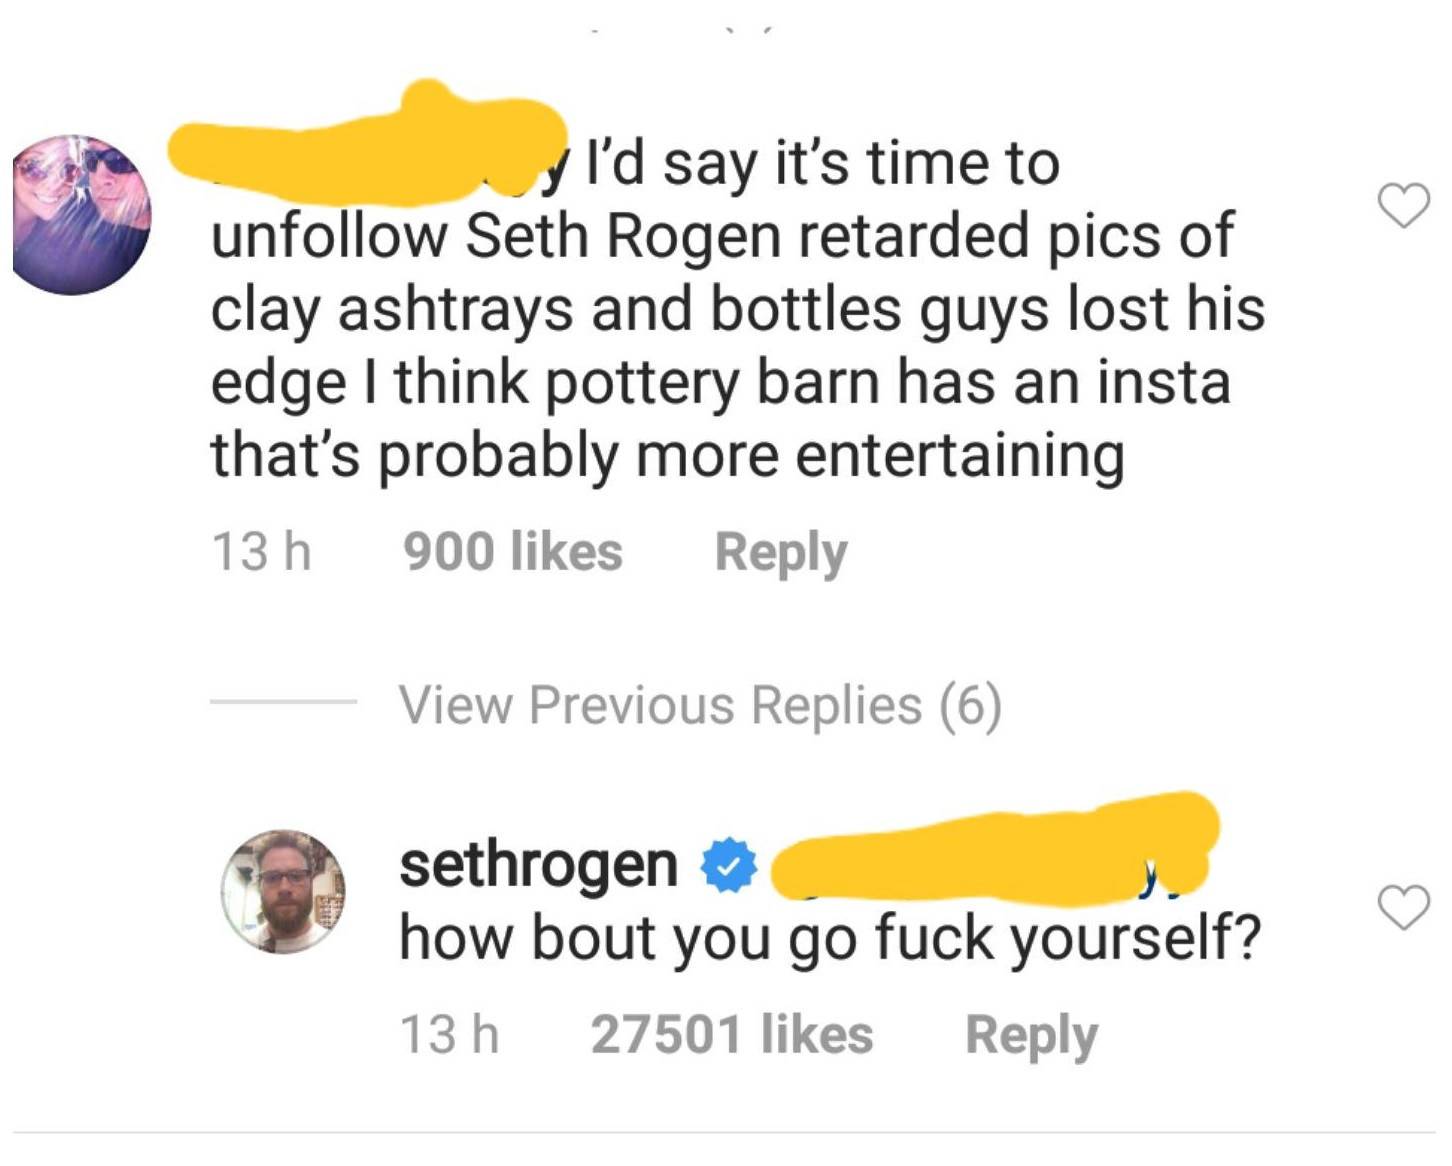 snout - I'd say it's time to un Seth Rogen retarded pics of clay ashtrays and bottles guys lost his edge I think pottery barn has an insta that's probably more entertaining 13 h 900 View Previous Replies 6 sethrogen how bout you go fuck yourself? 13 h 275